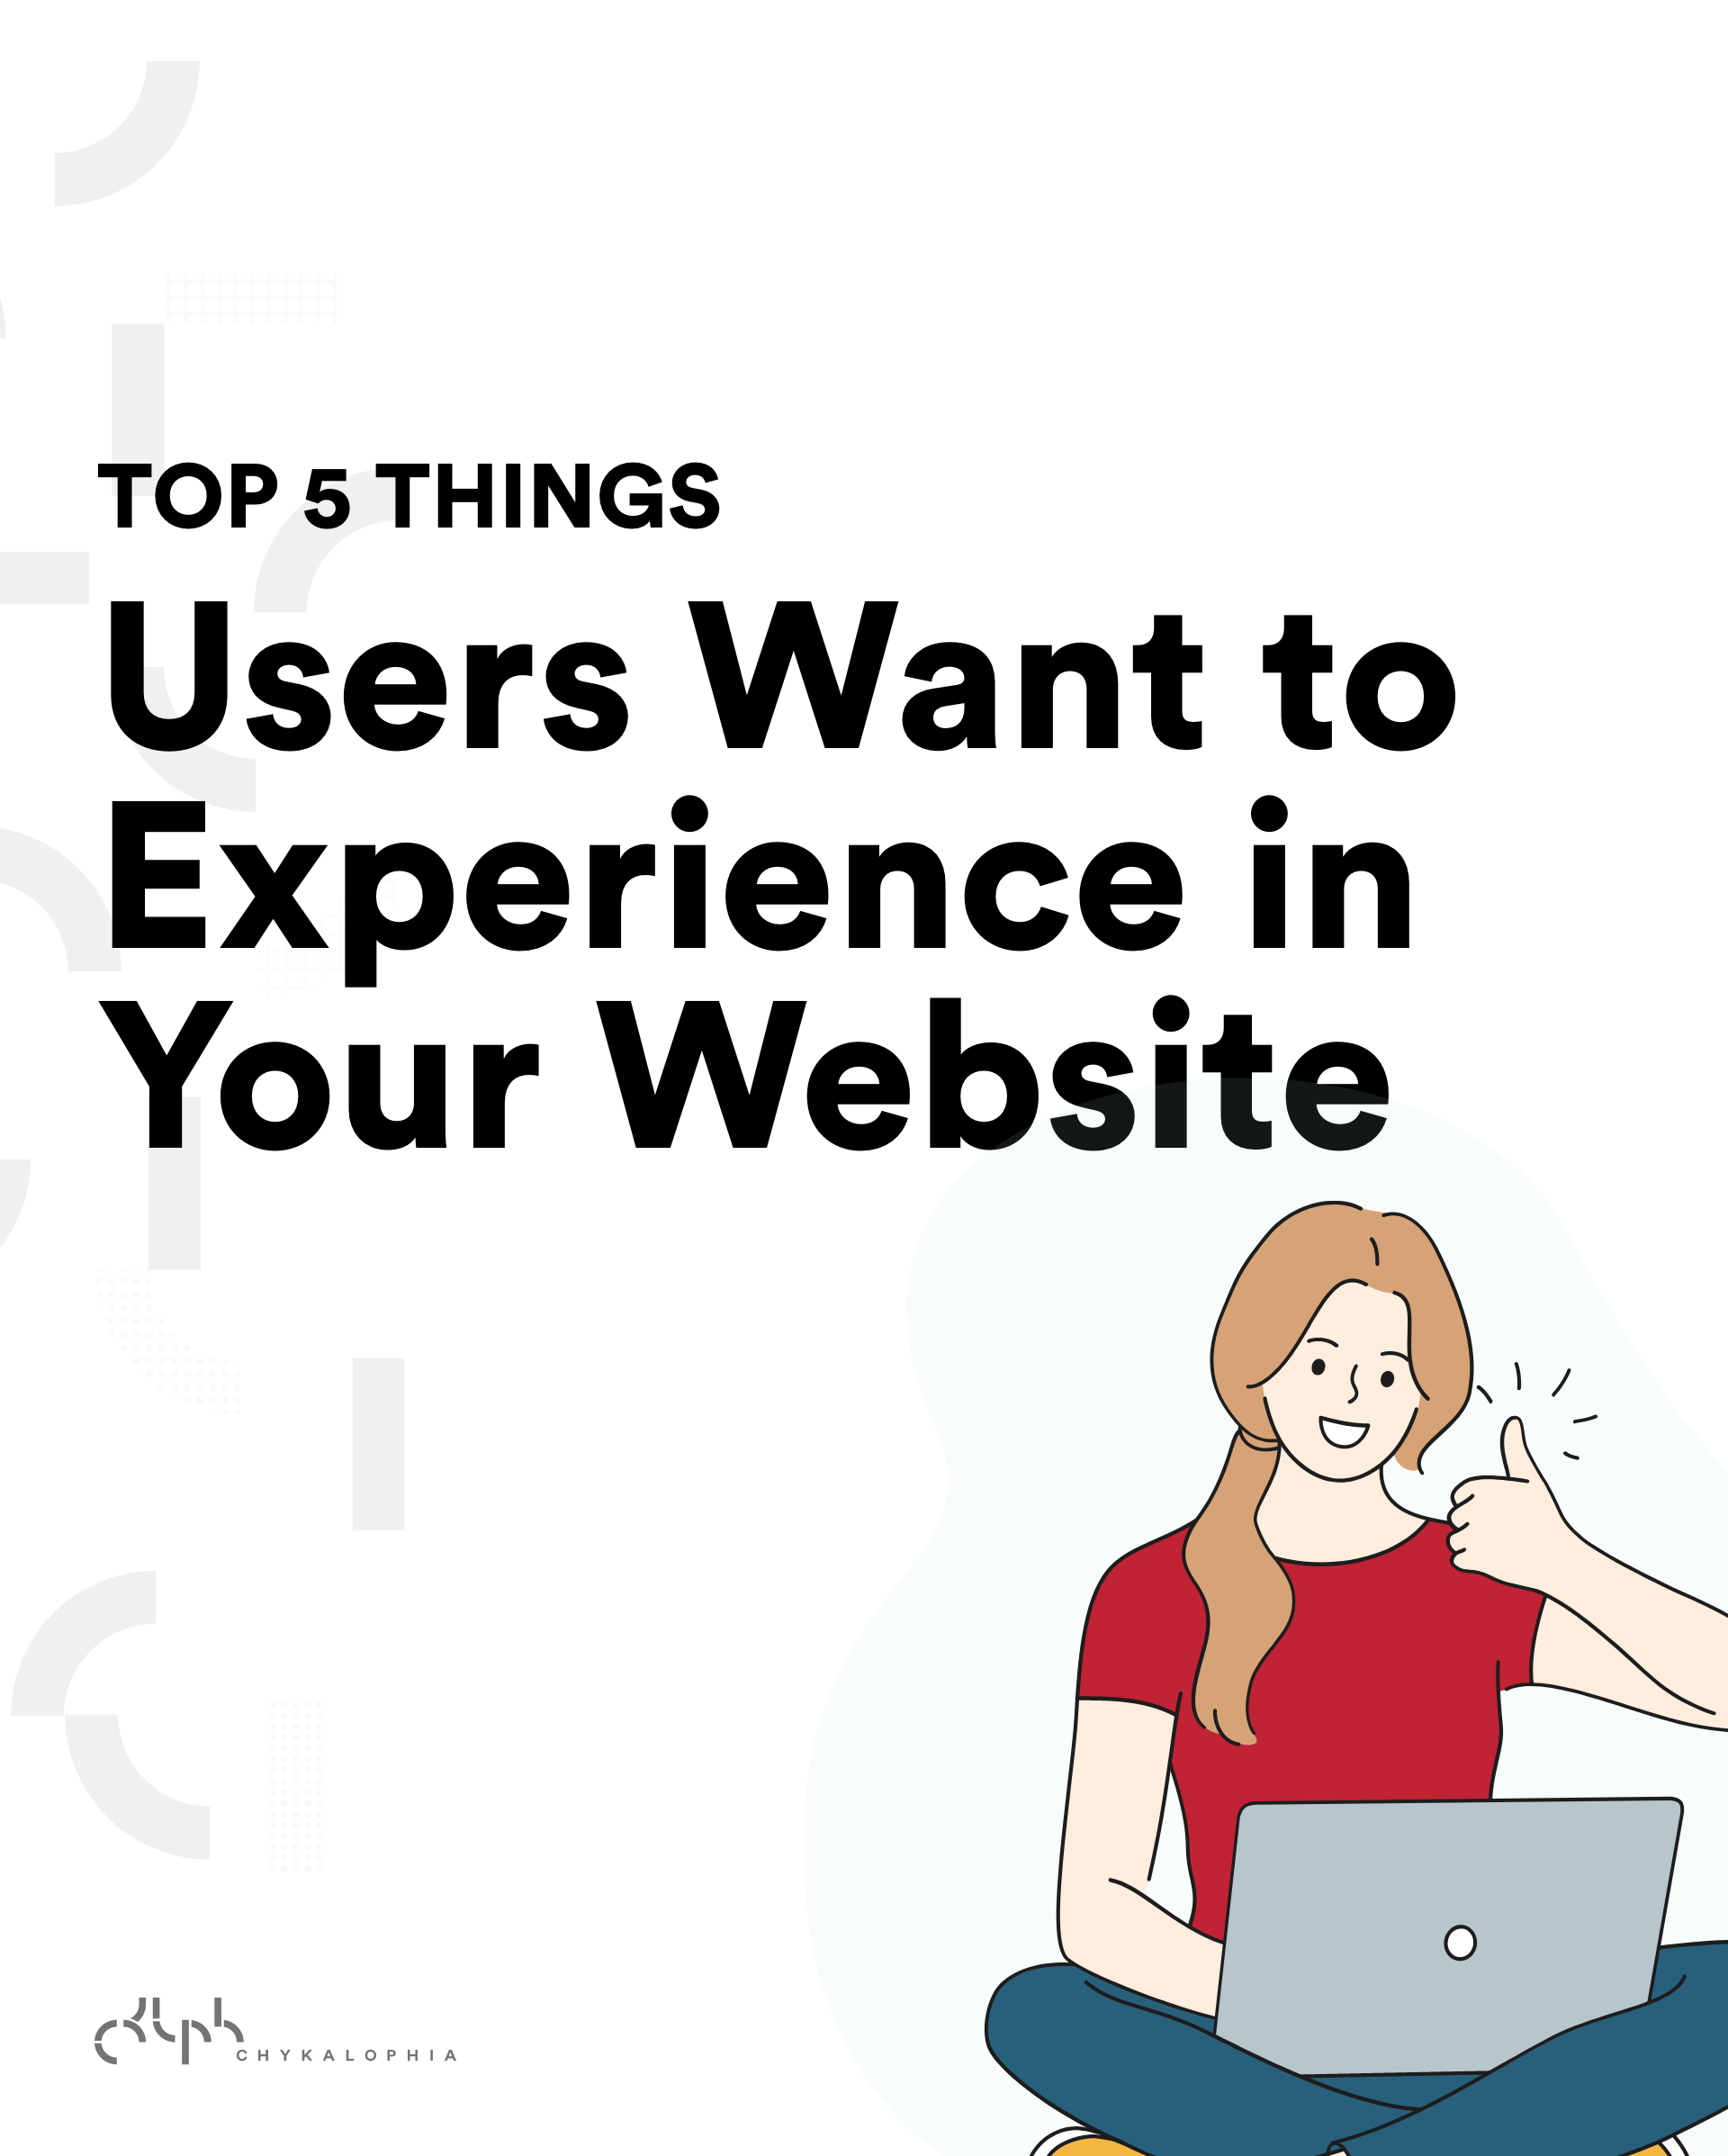 Top 5 Things Users Want to Experience on Your Website